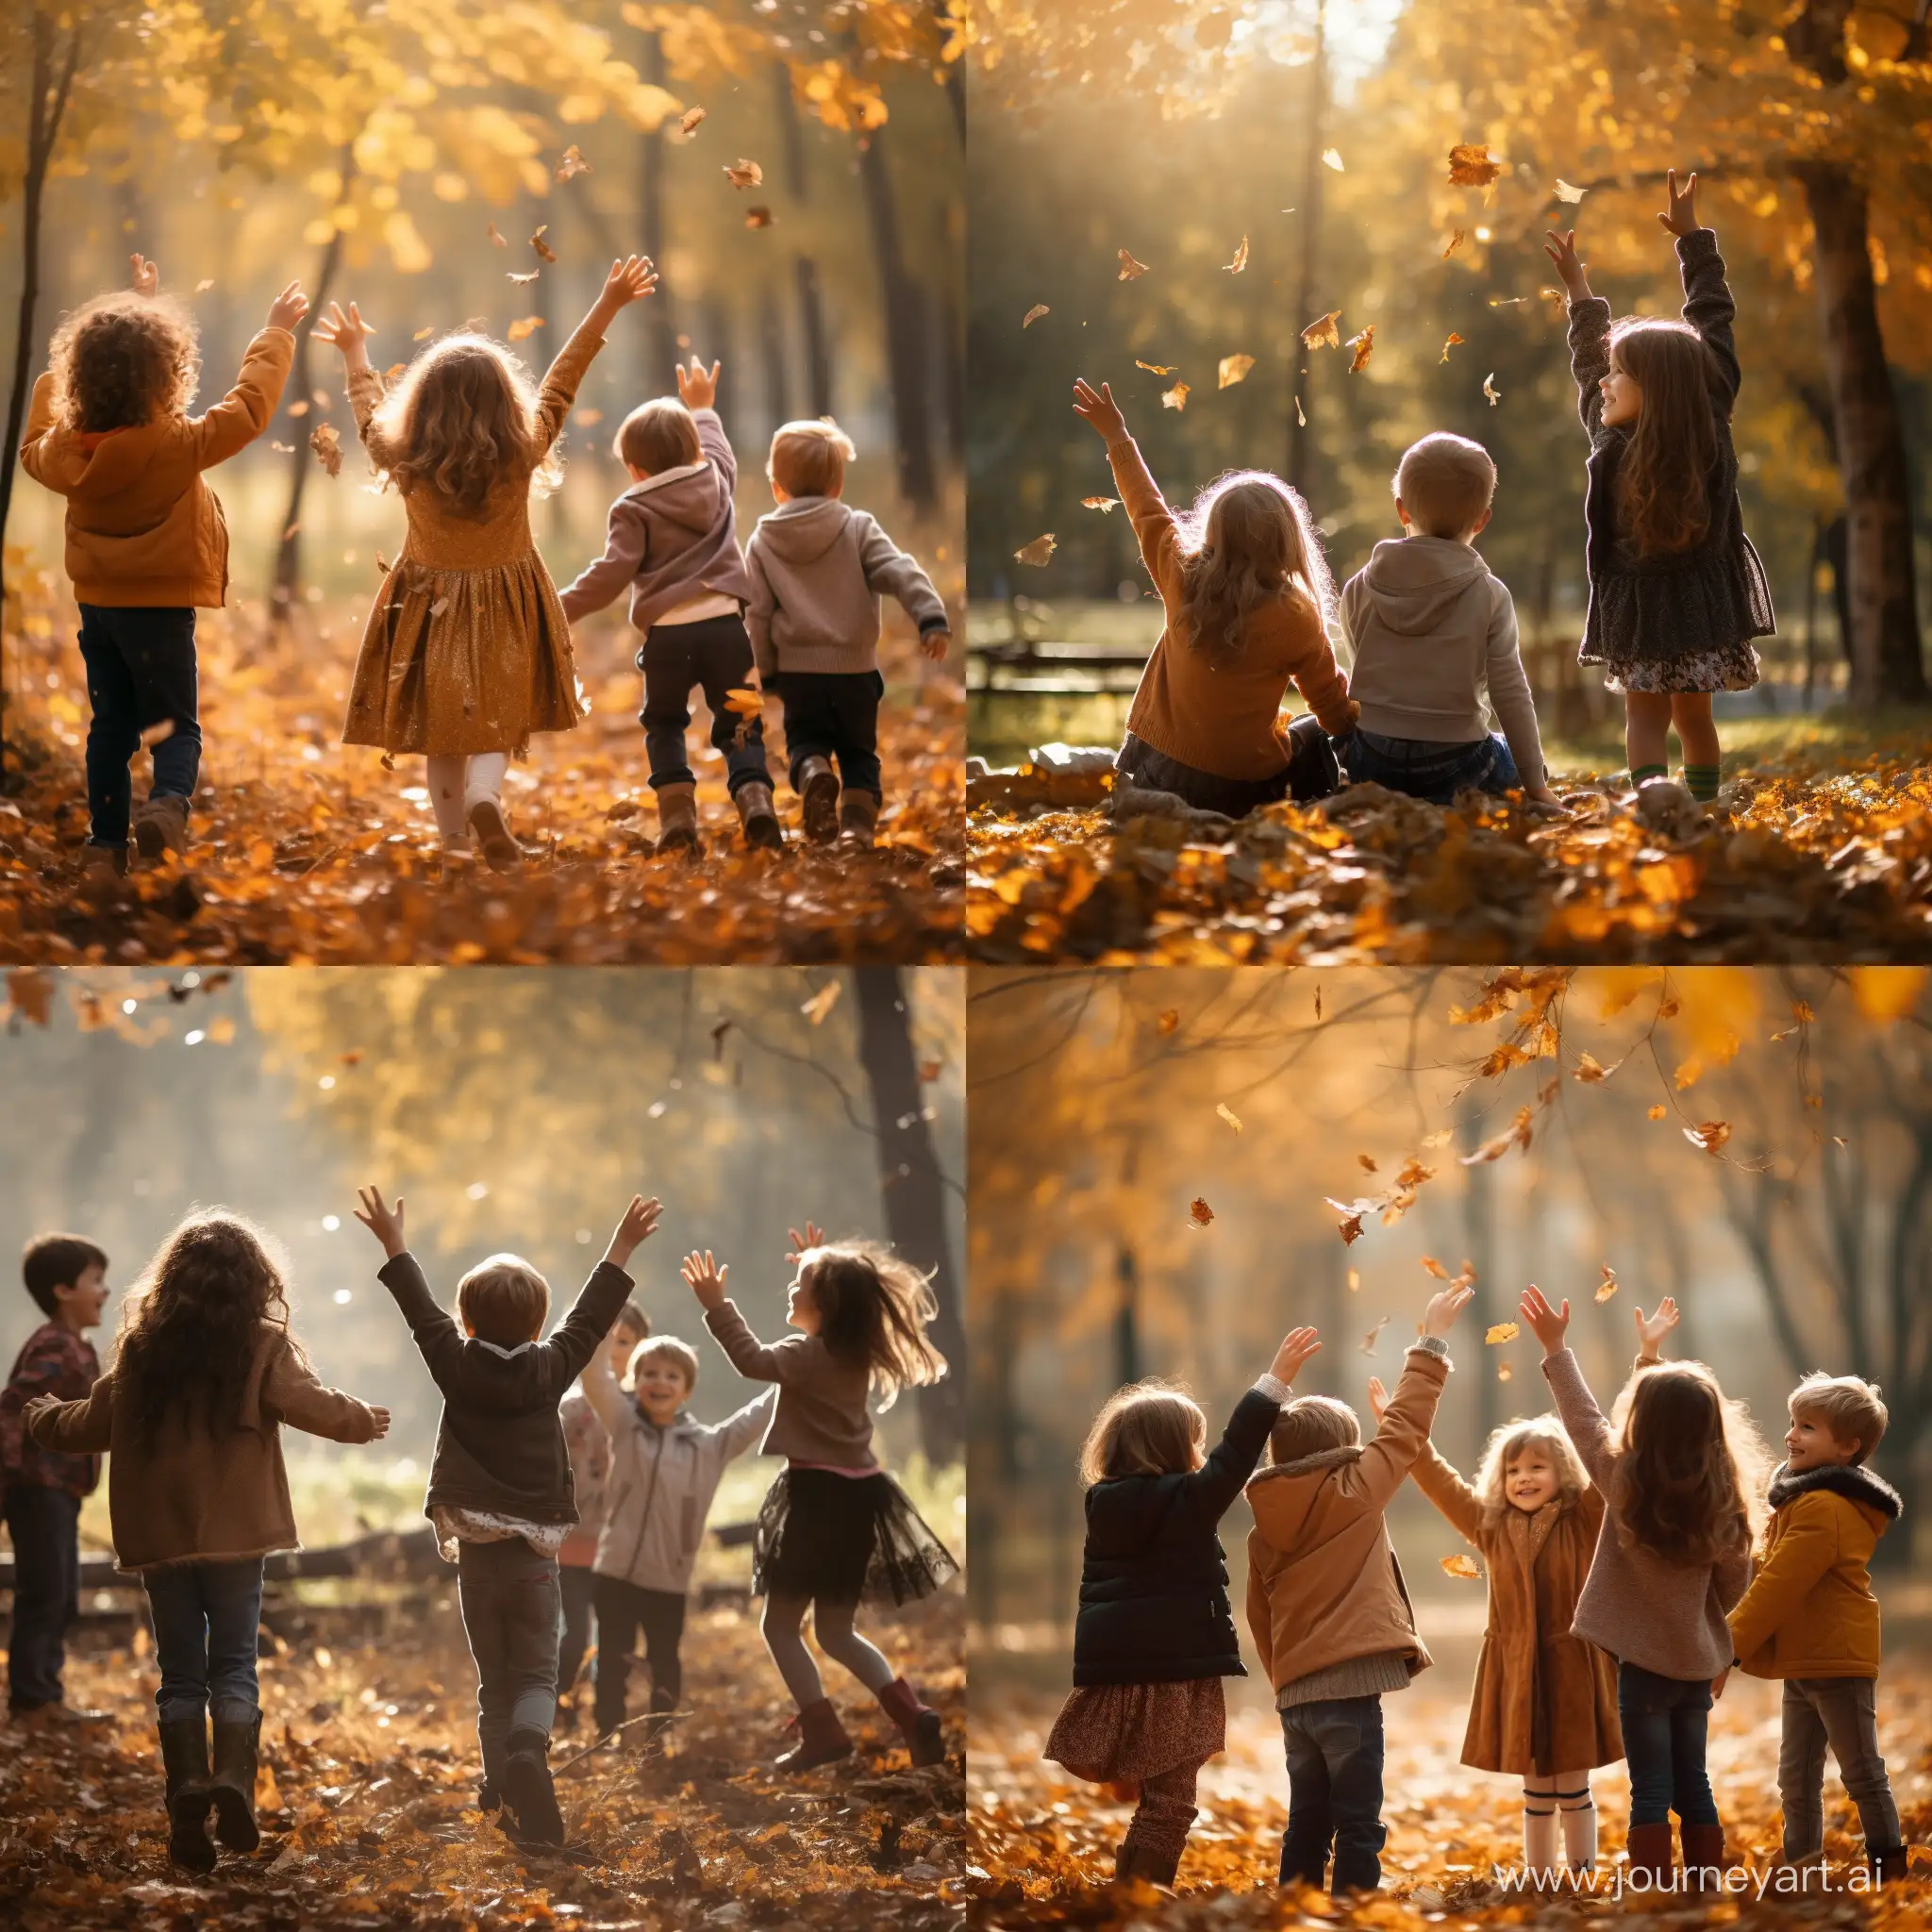 Joyful-Children-Playing-with-Outstretched-Arms-in-the-Autumn-Park